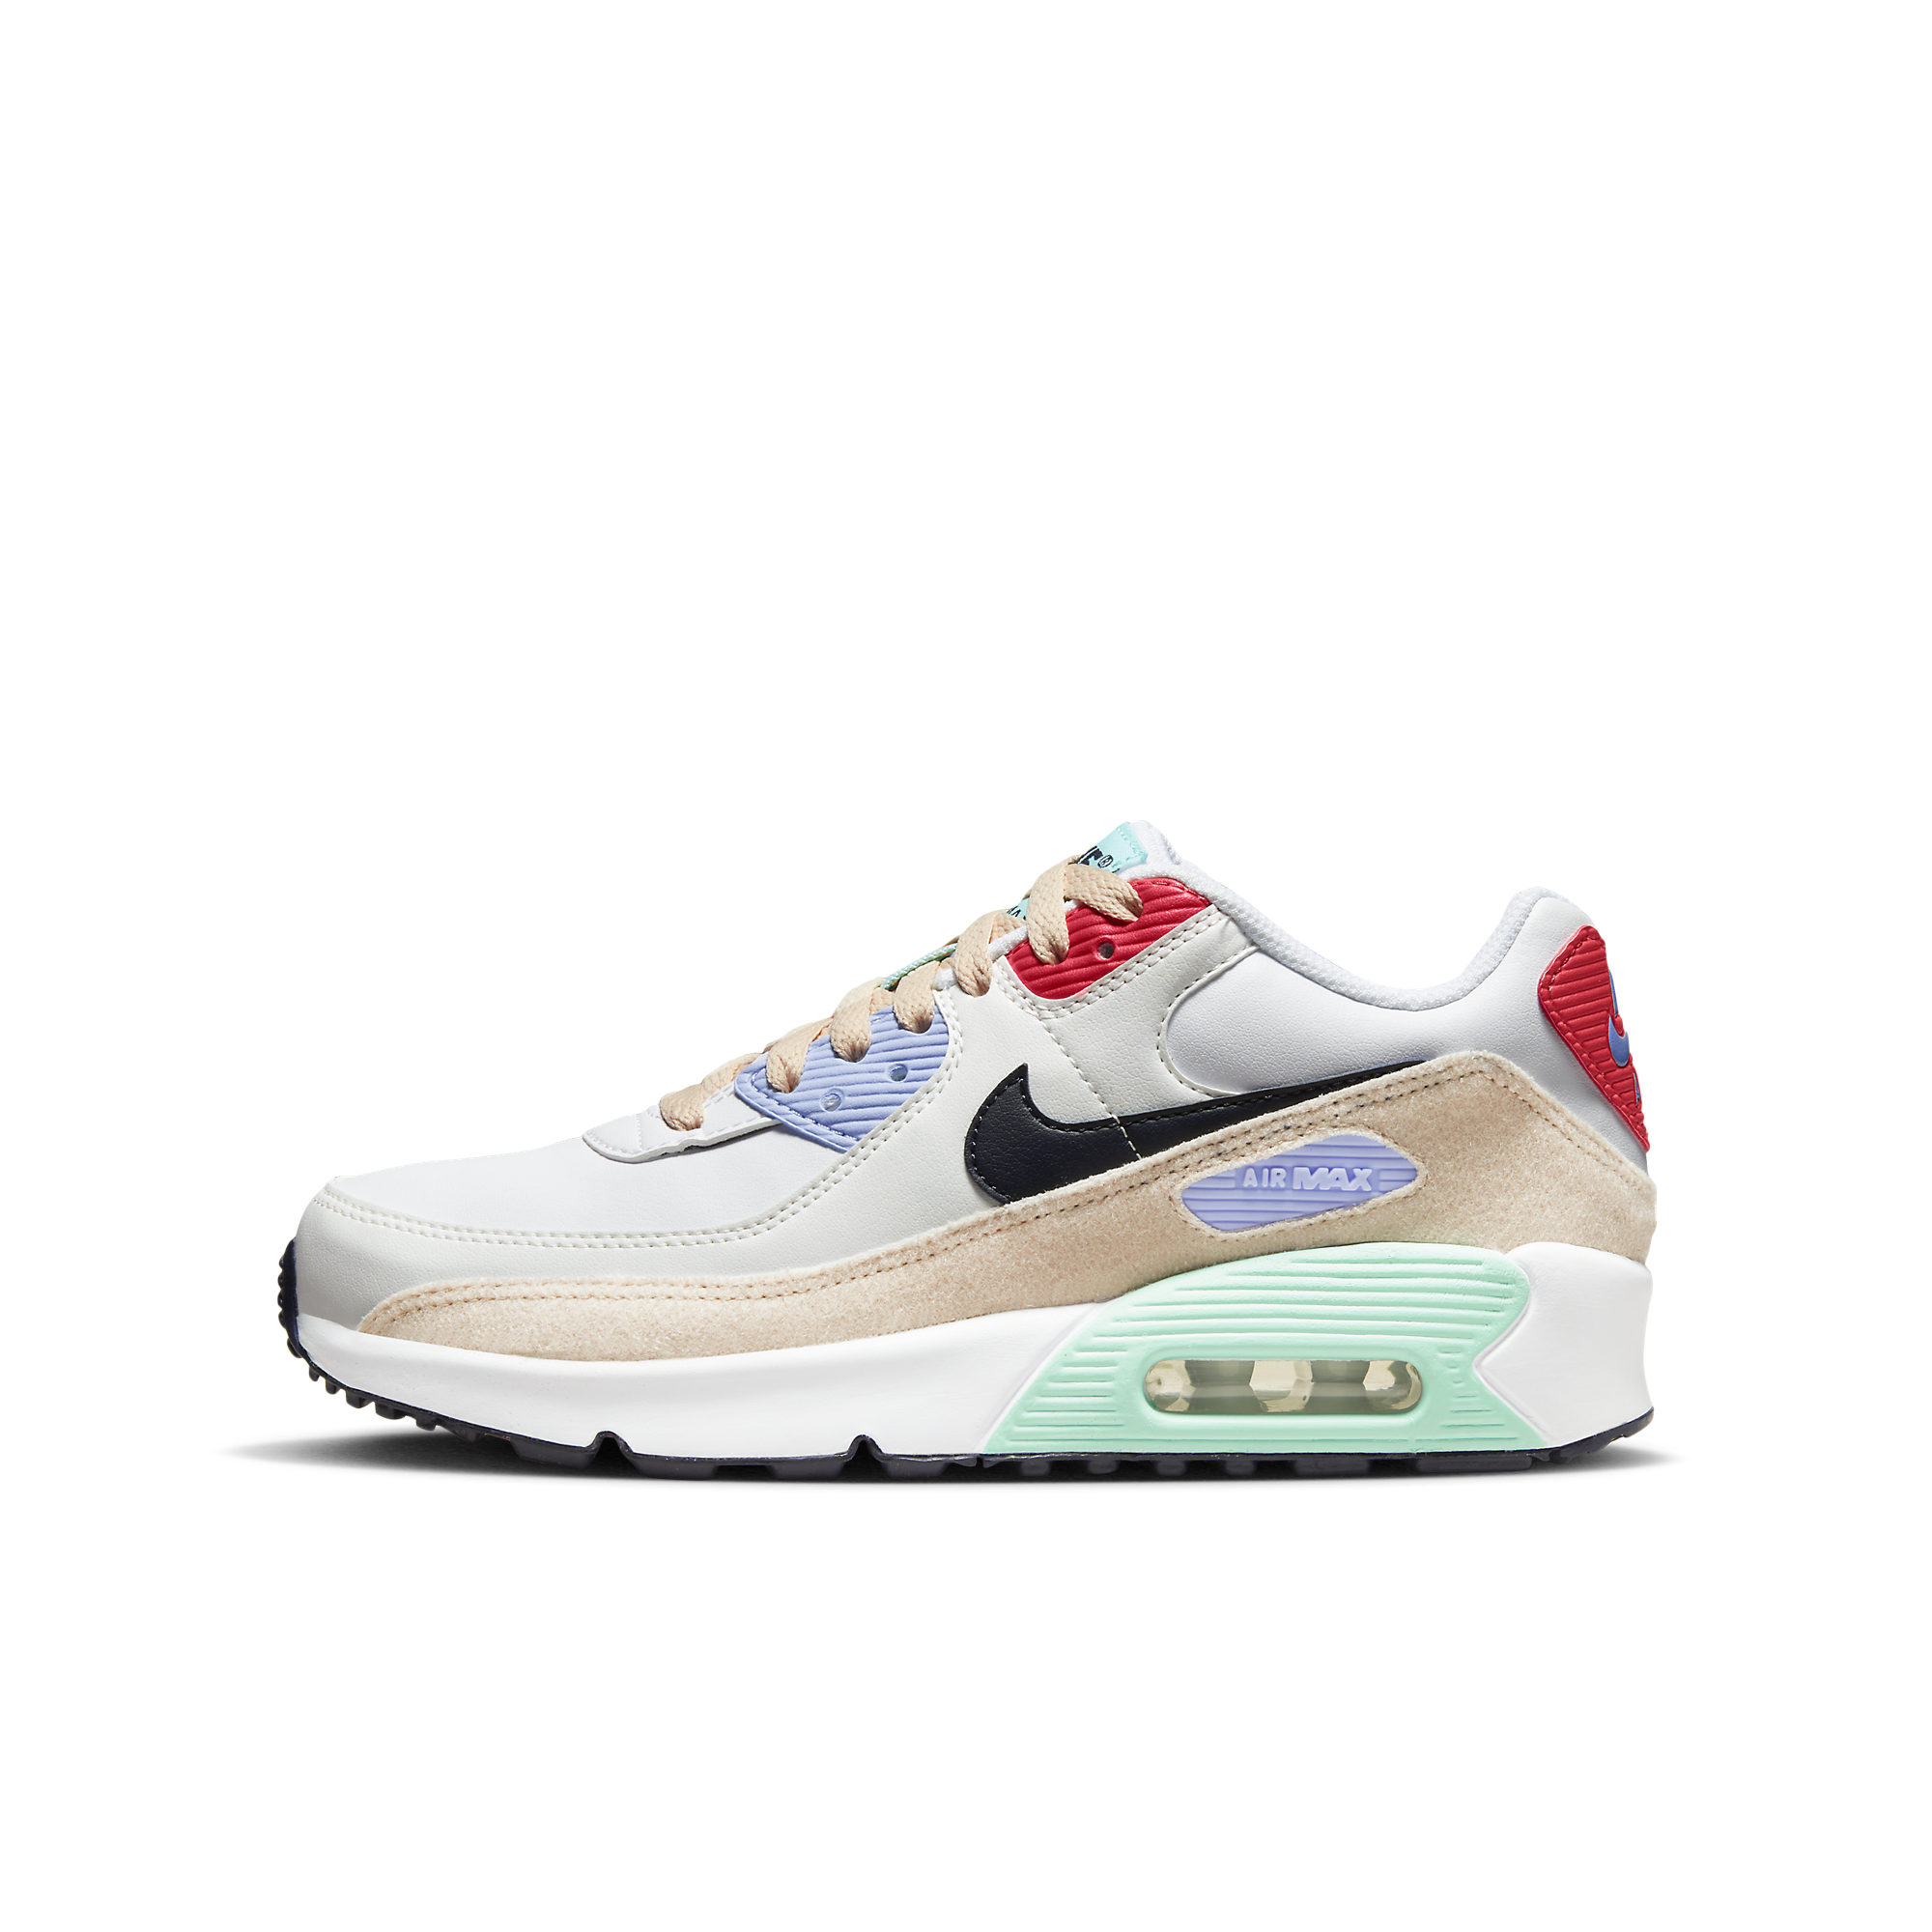 Air Max 90 LTR SE (GS) "Patches"